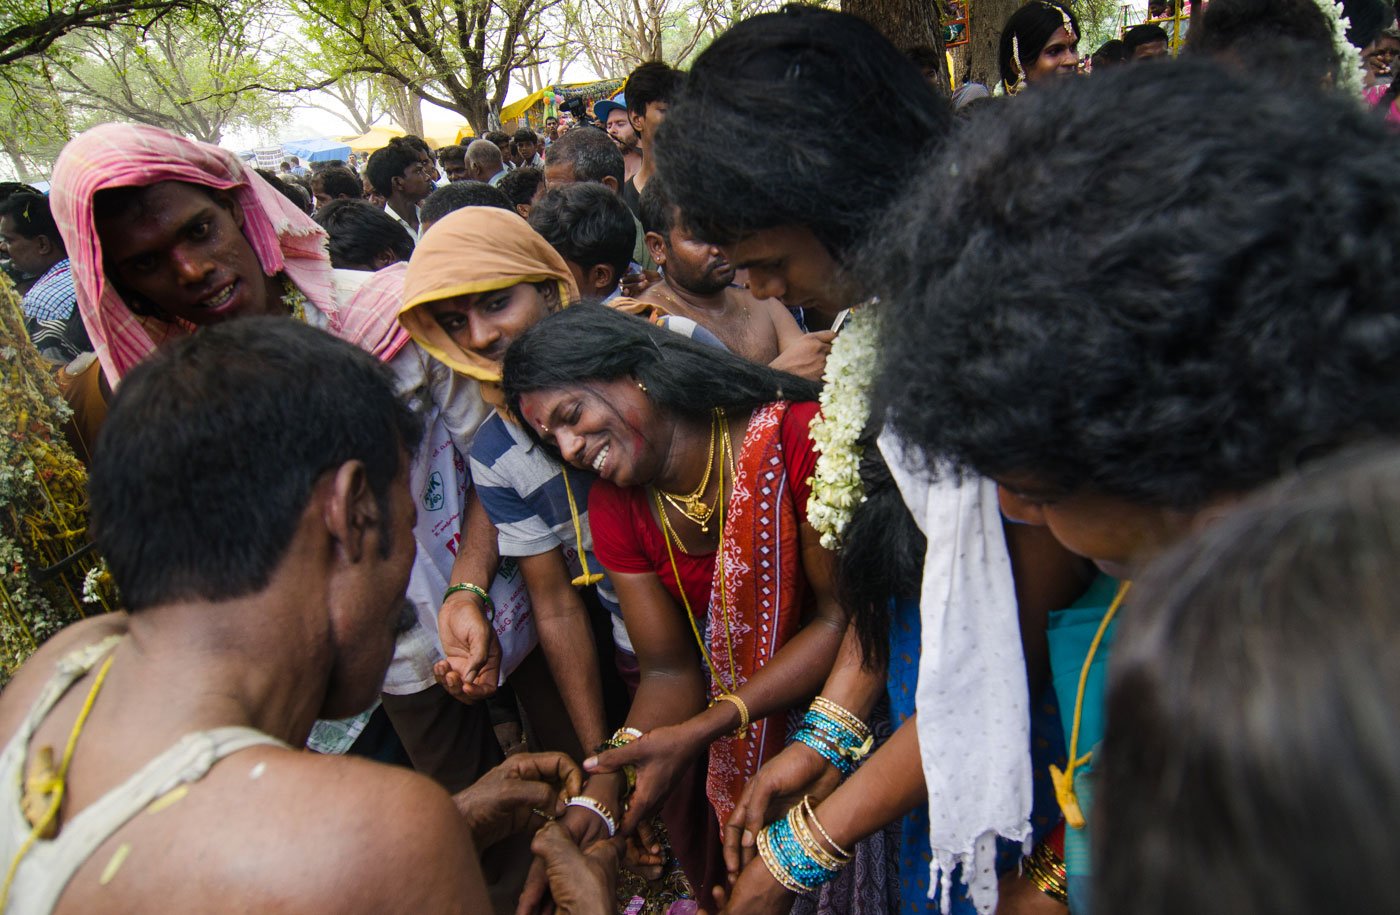 A priest breaks an aravani’s bangles – one of the rituals of widowhood. Visibly distraught, she begins to sob.  Many visitors stand around watching the rituals